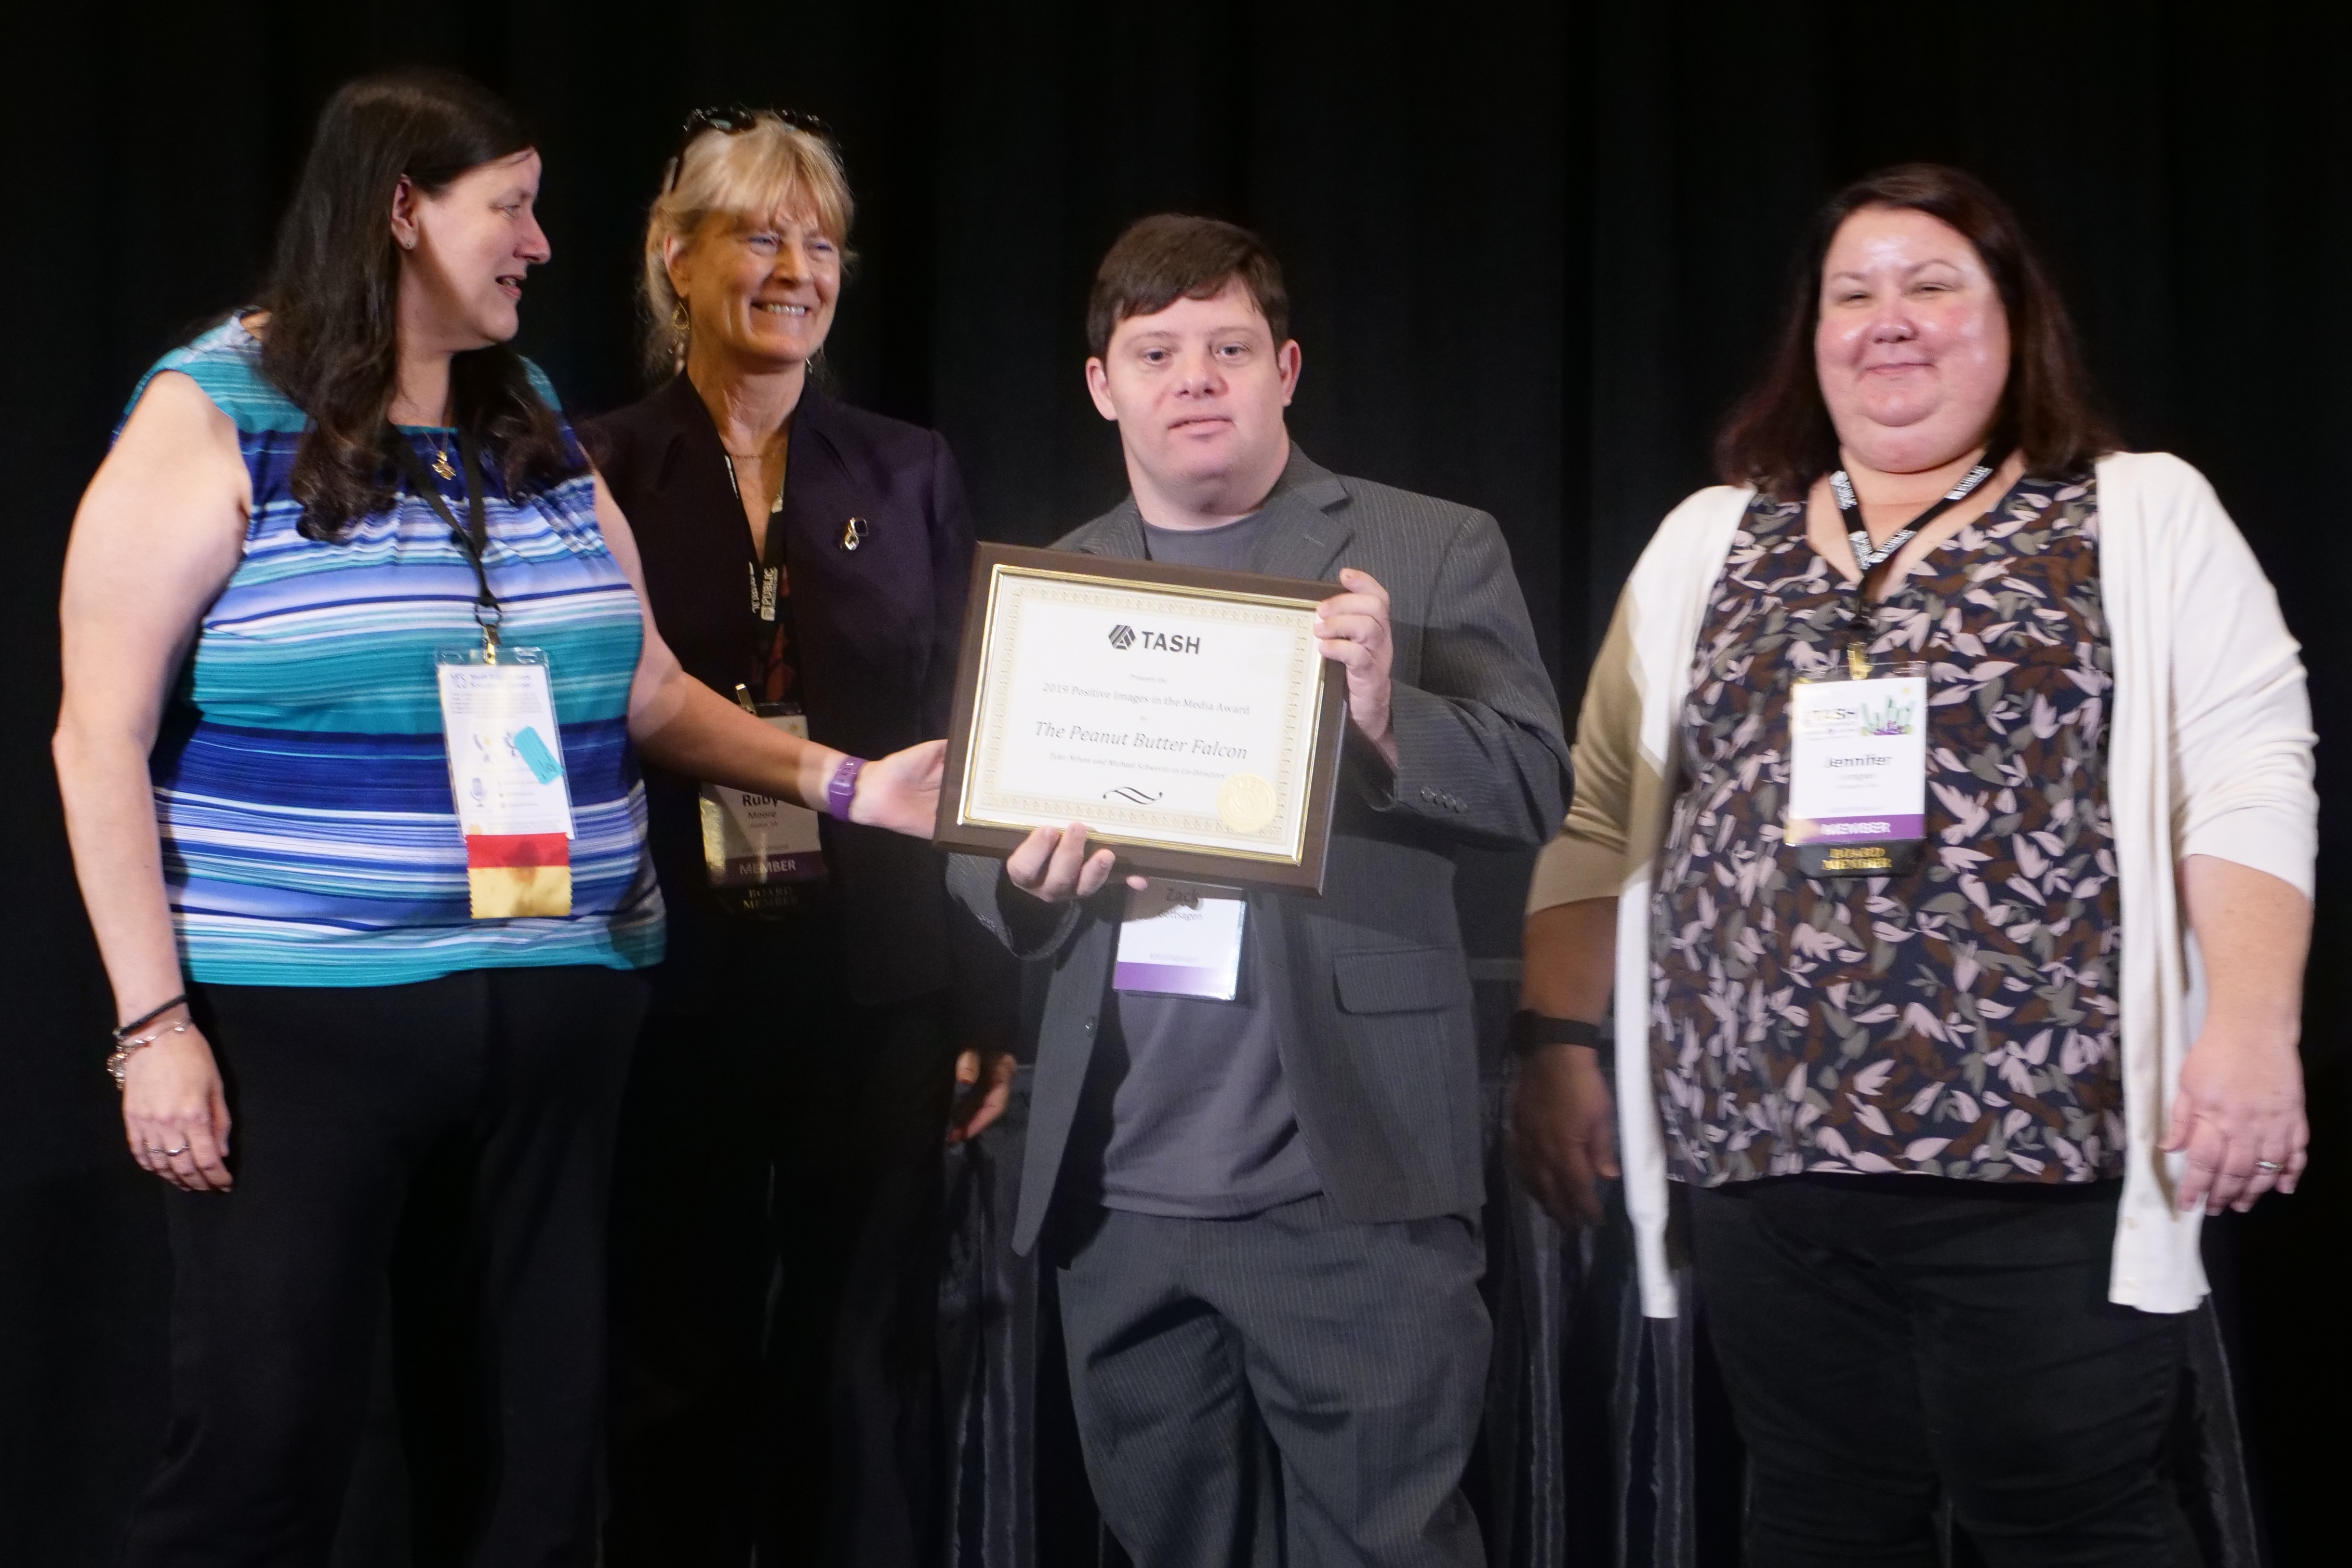 A photograph of Zack Gottsagen accepting the Positive Images in the Media Award from Tia Nelis. Ruby Moore and Jenny Lengyel are also in the group.